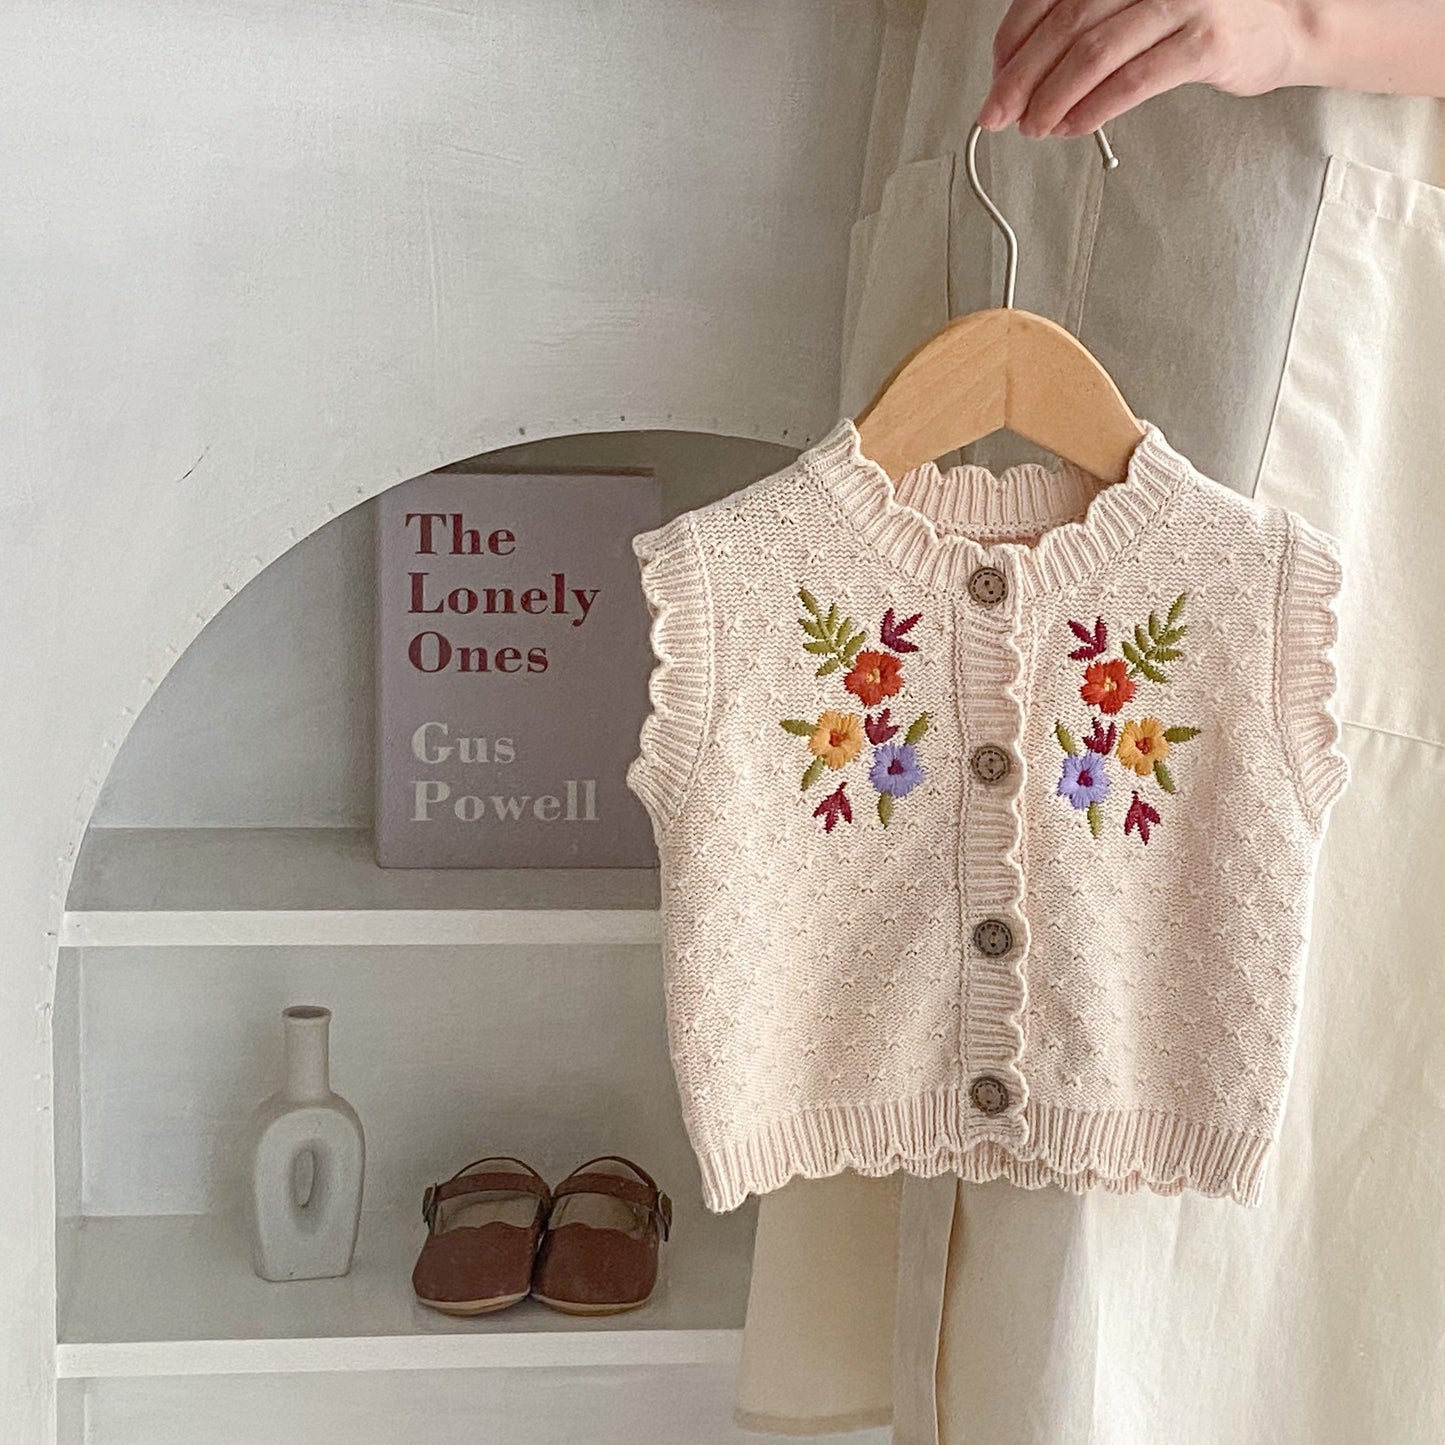 Baby girls embroidered vest